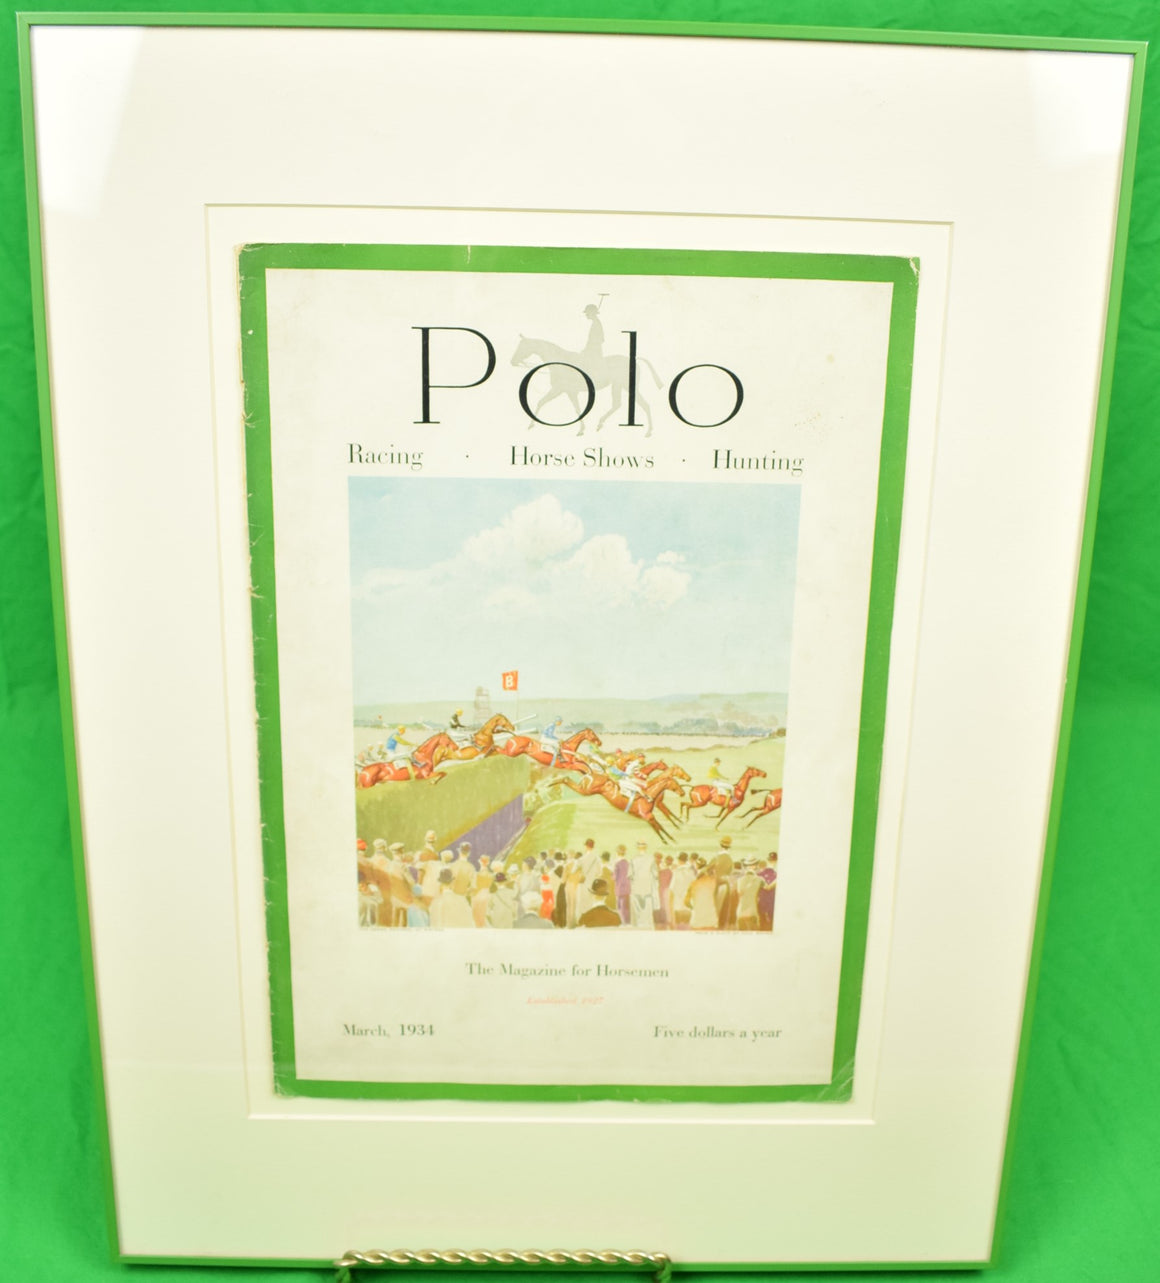 "Polo Magazine Cover March, 1934" w/ the Grand National at Aintree by Paul Brown